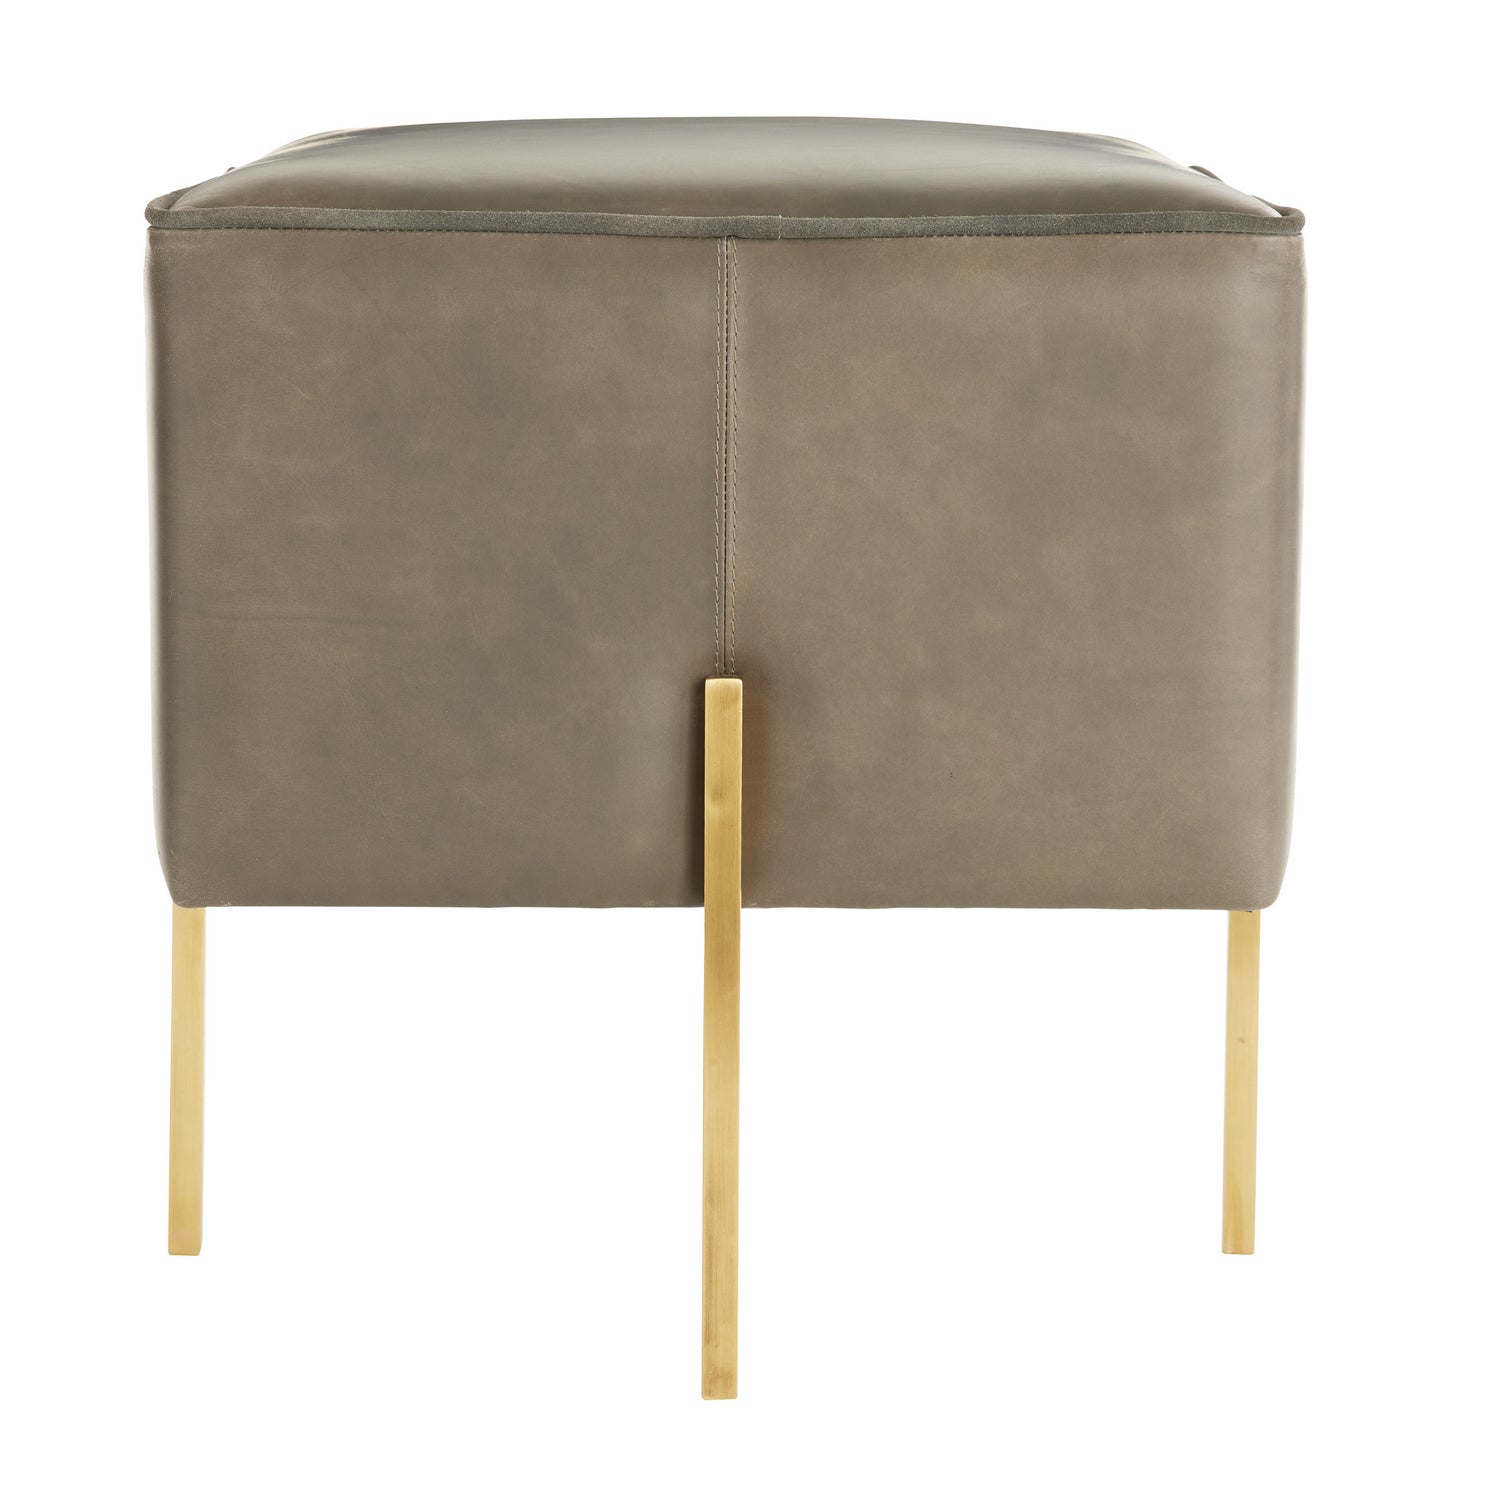 Stool from the Kensington collection in Morel finish